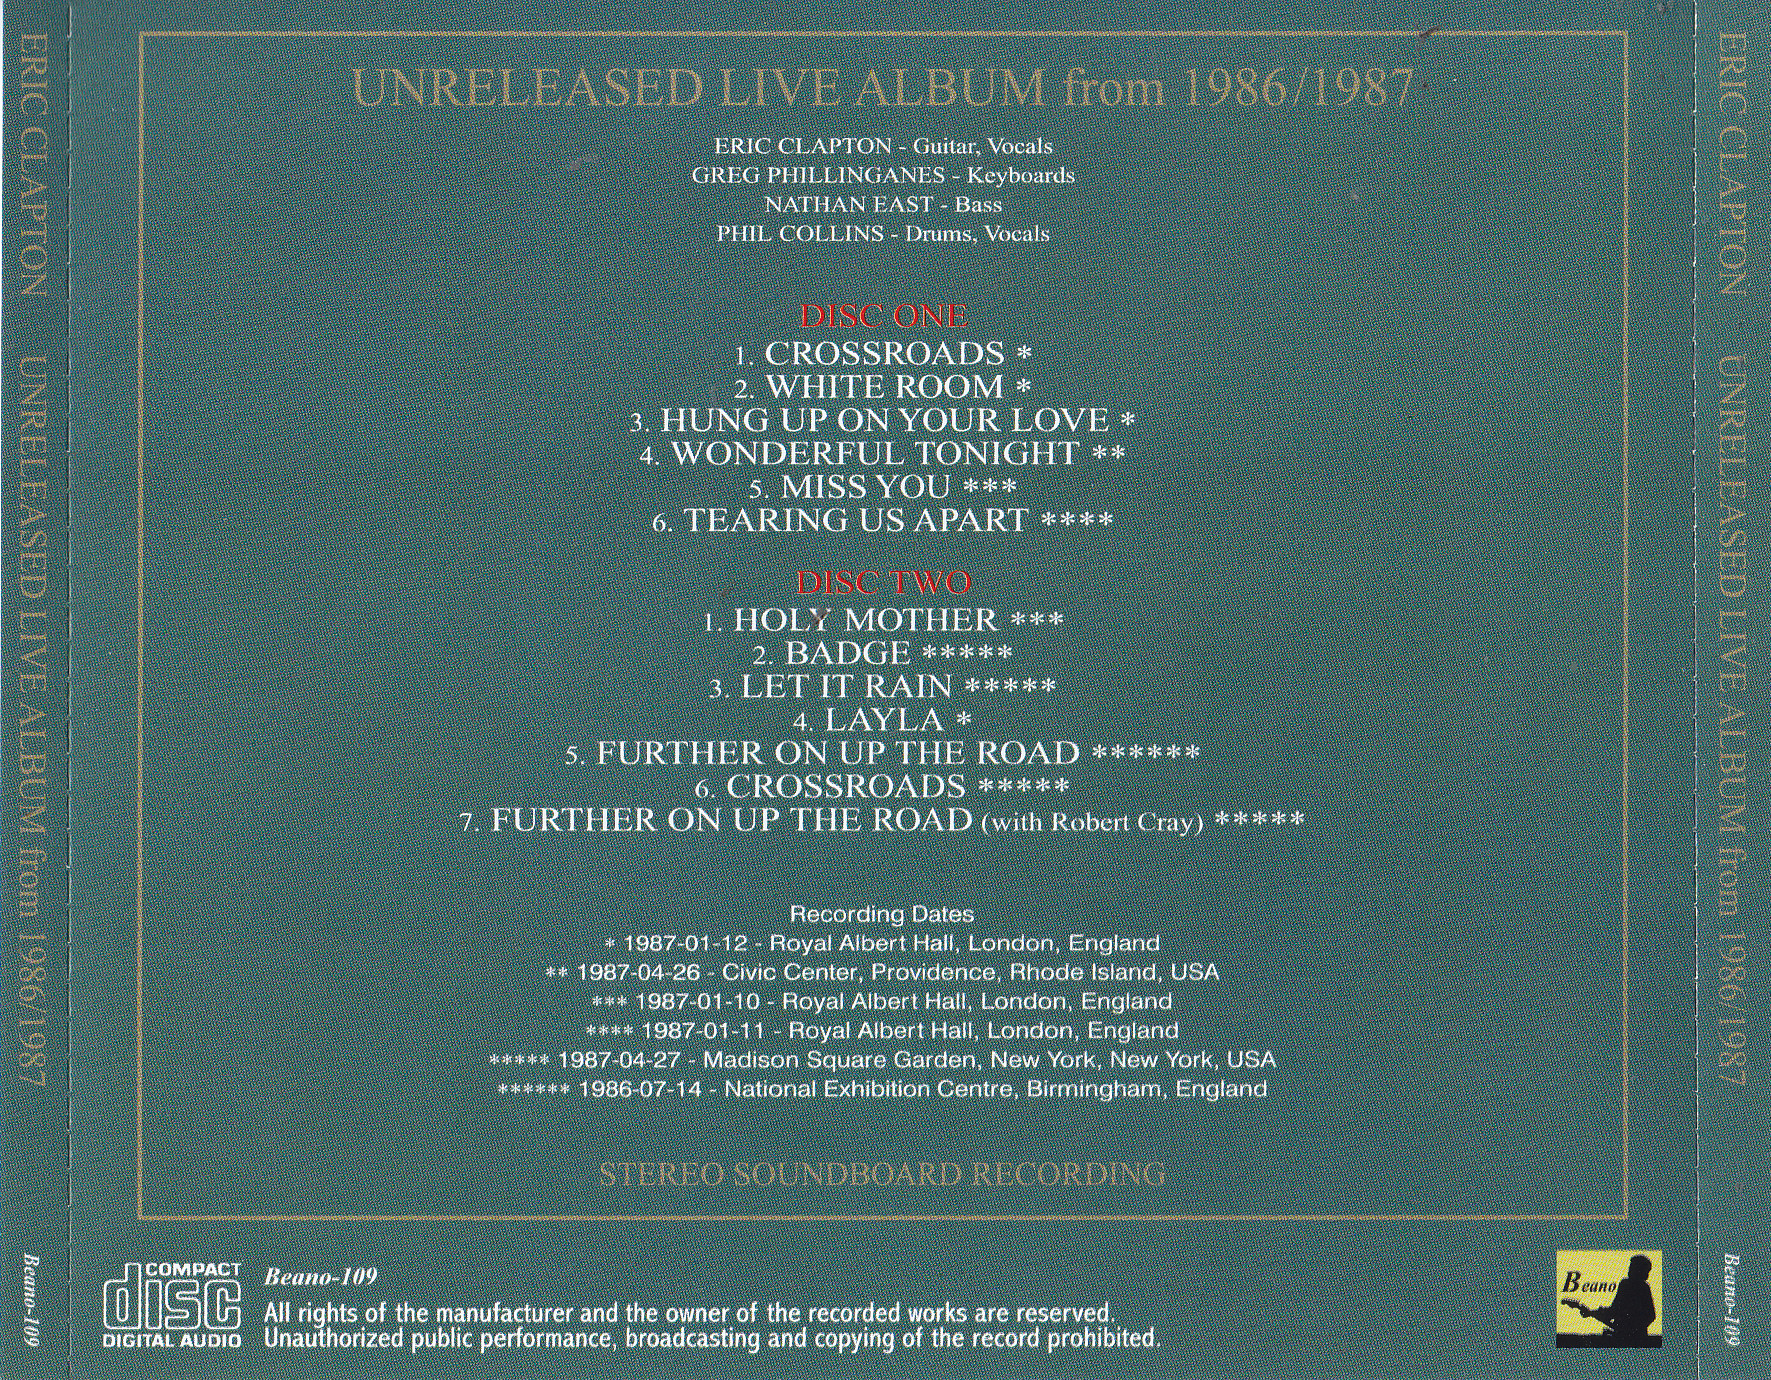 Eric Clapton / Unreleased Live Album From 1986 / 1987 / 2CD 